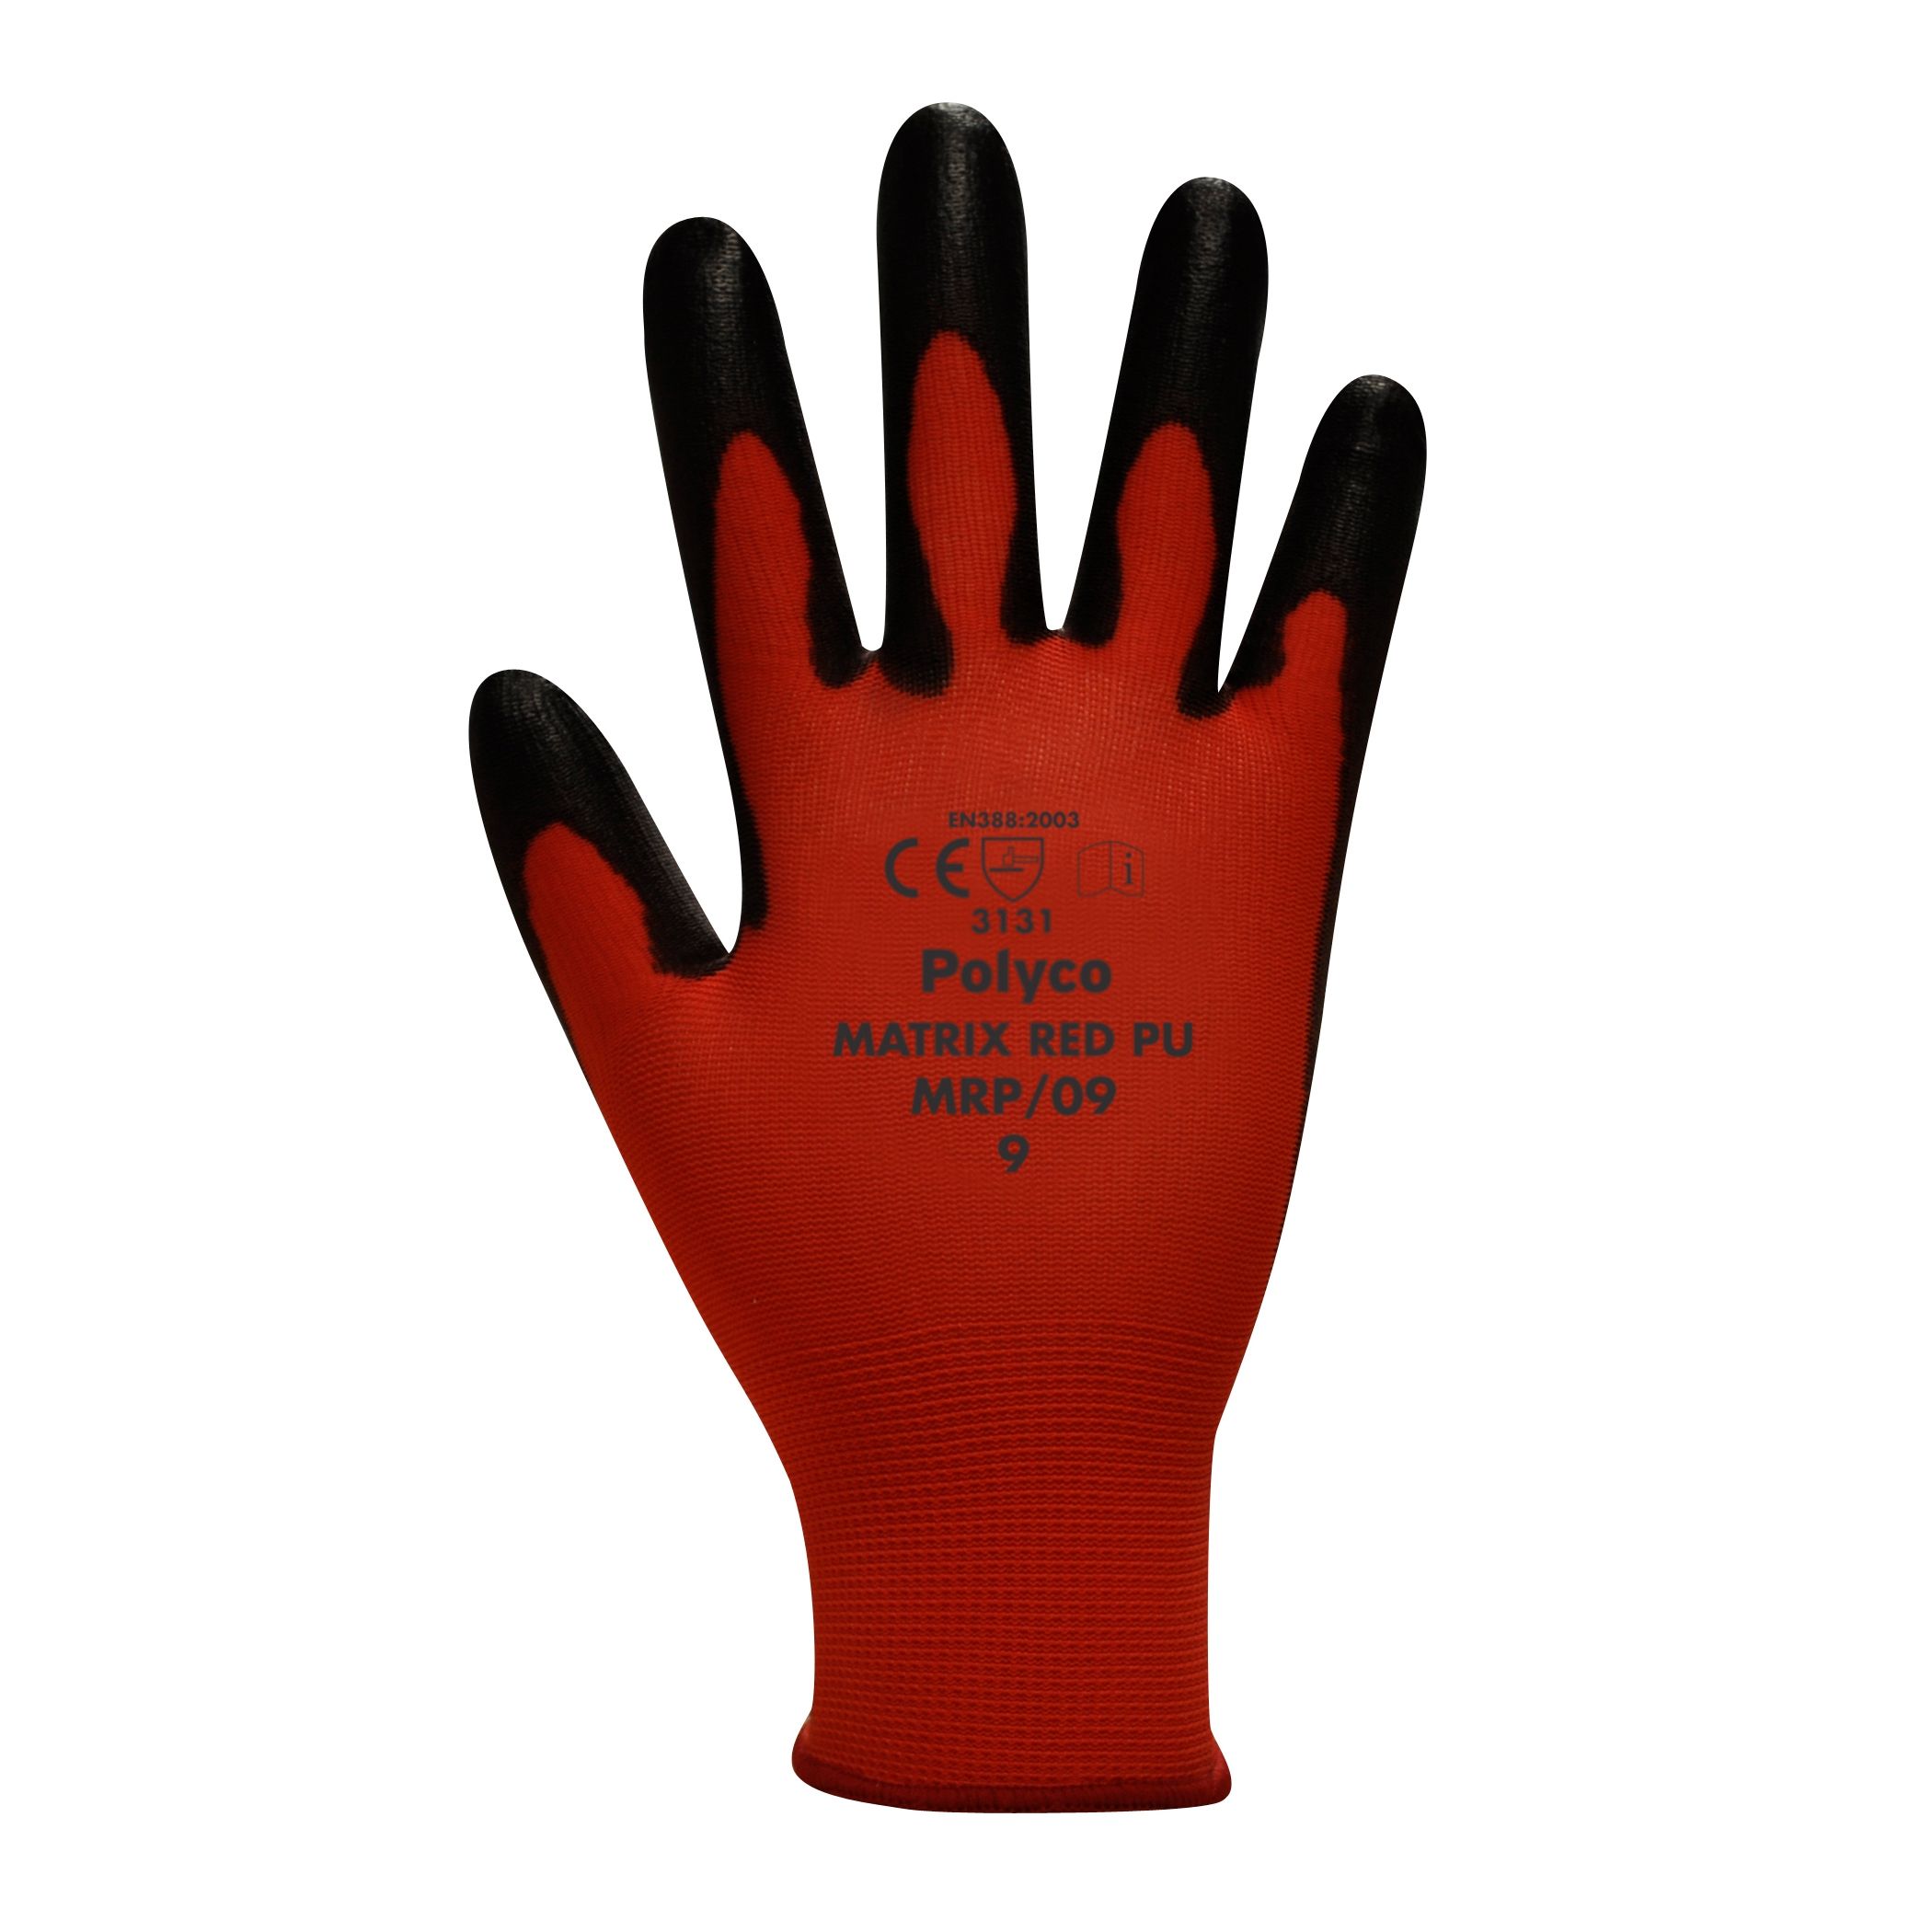 Polyco Red Matrix Nitrile Grip Fully Coated Builders Gardening Work Gloves 